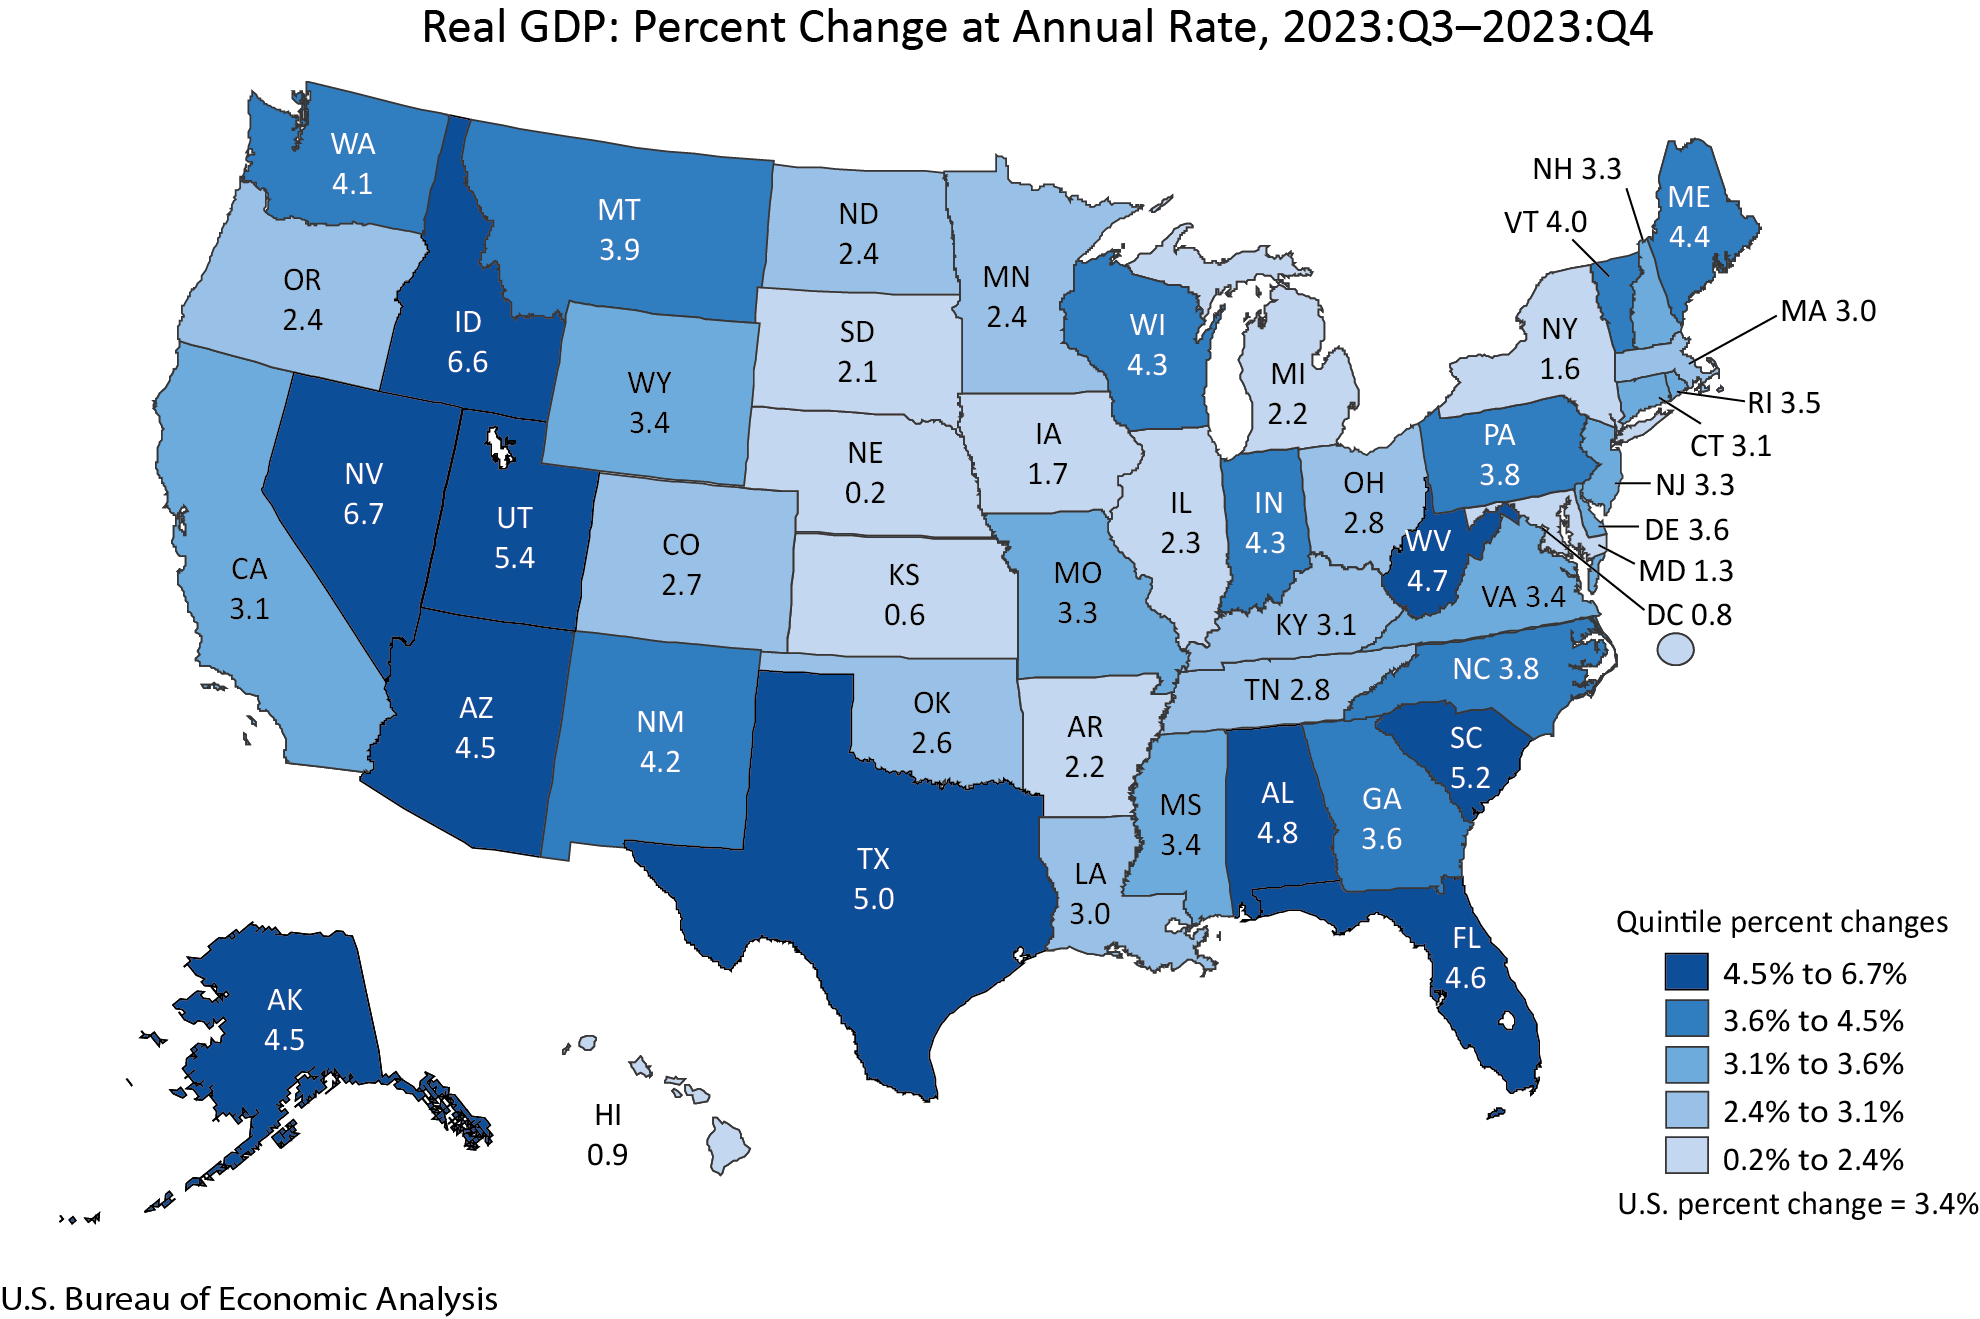 Map: Real GDP: Percent Change at Annual Rate, 2023:Q3-2023:Q4